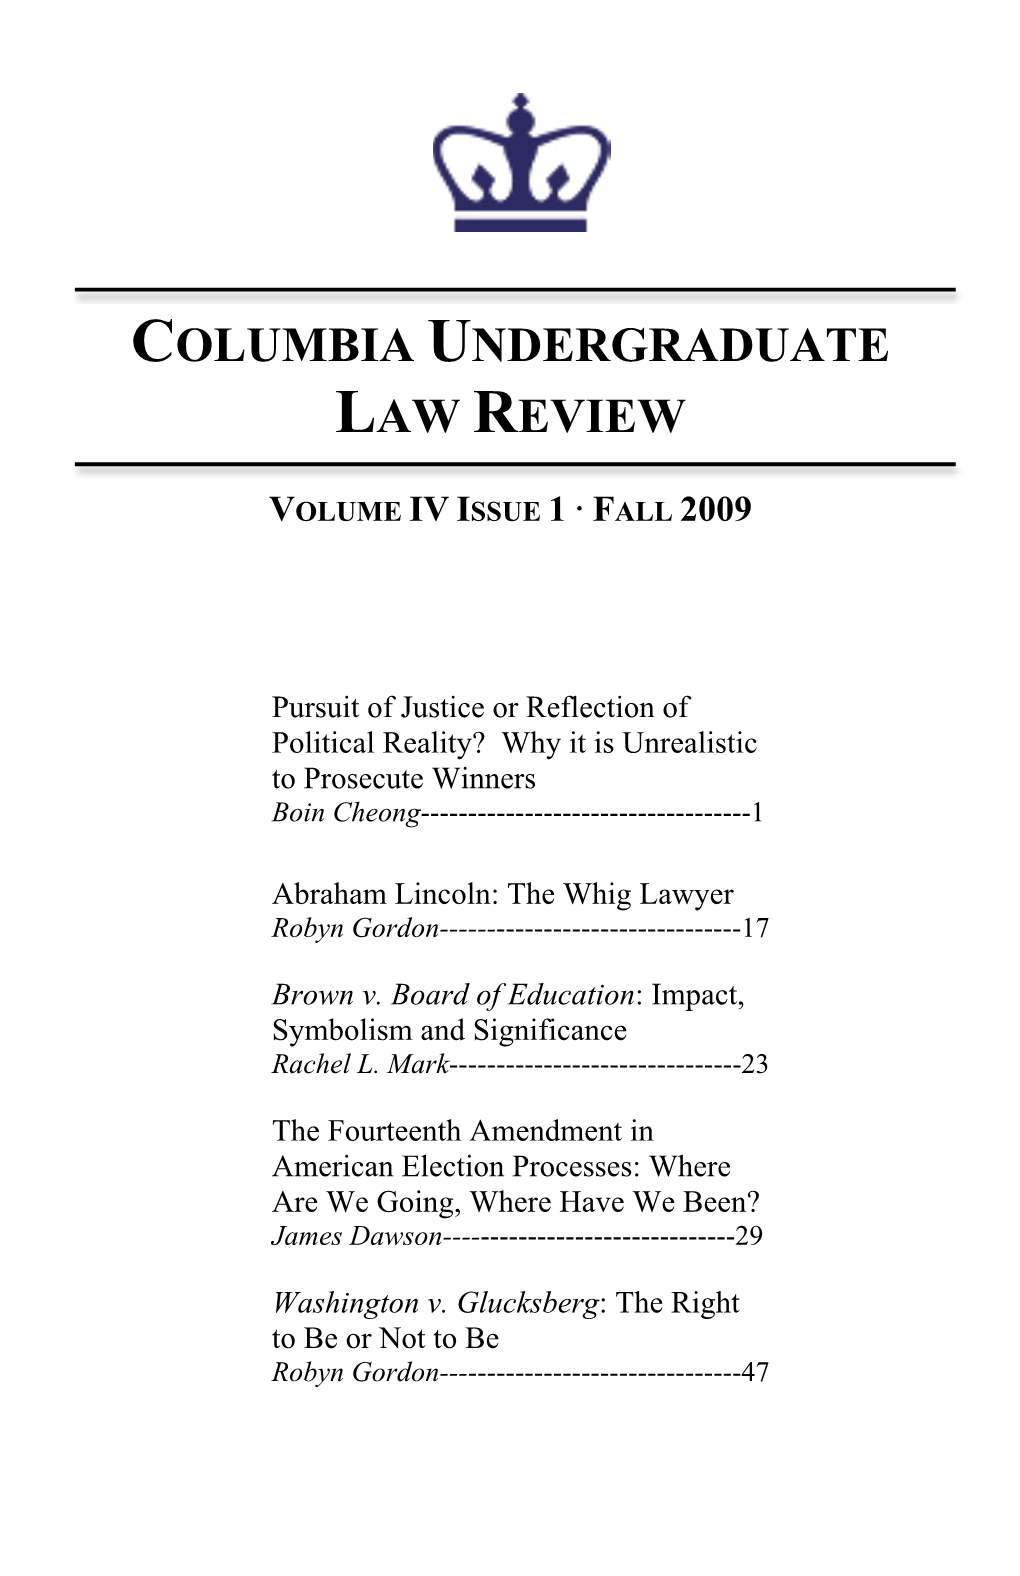 Cover Page Fall 2009 Issue